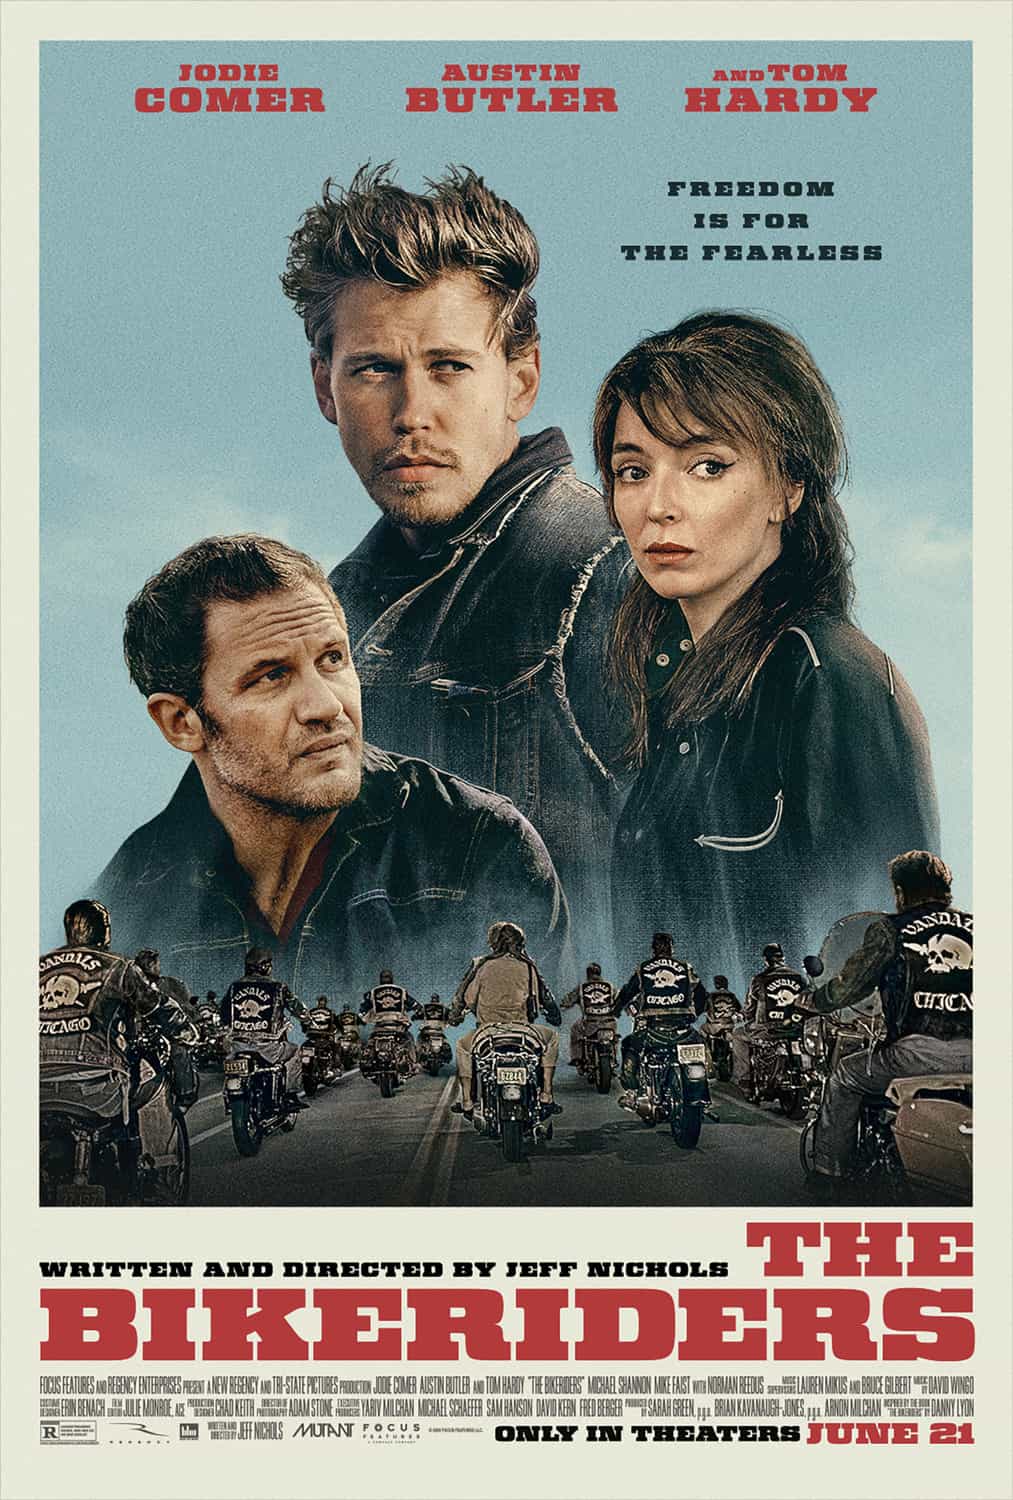 New poster has been released for The Bikeriders which stars Austin Butler and Jodie Comer - movie UK release date 21st June 2024 #thebikeriders